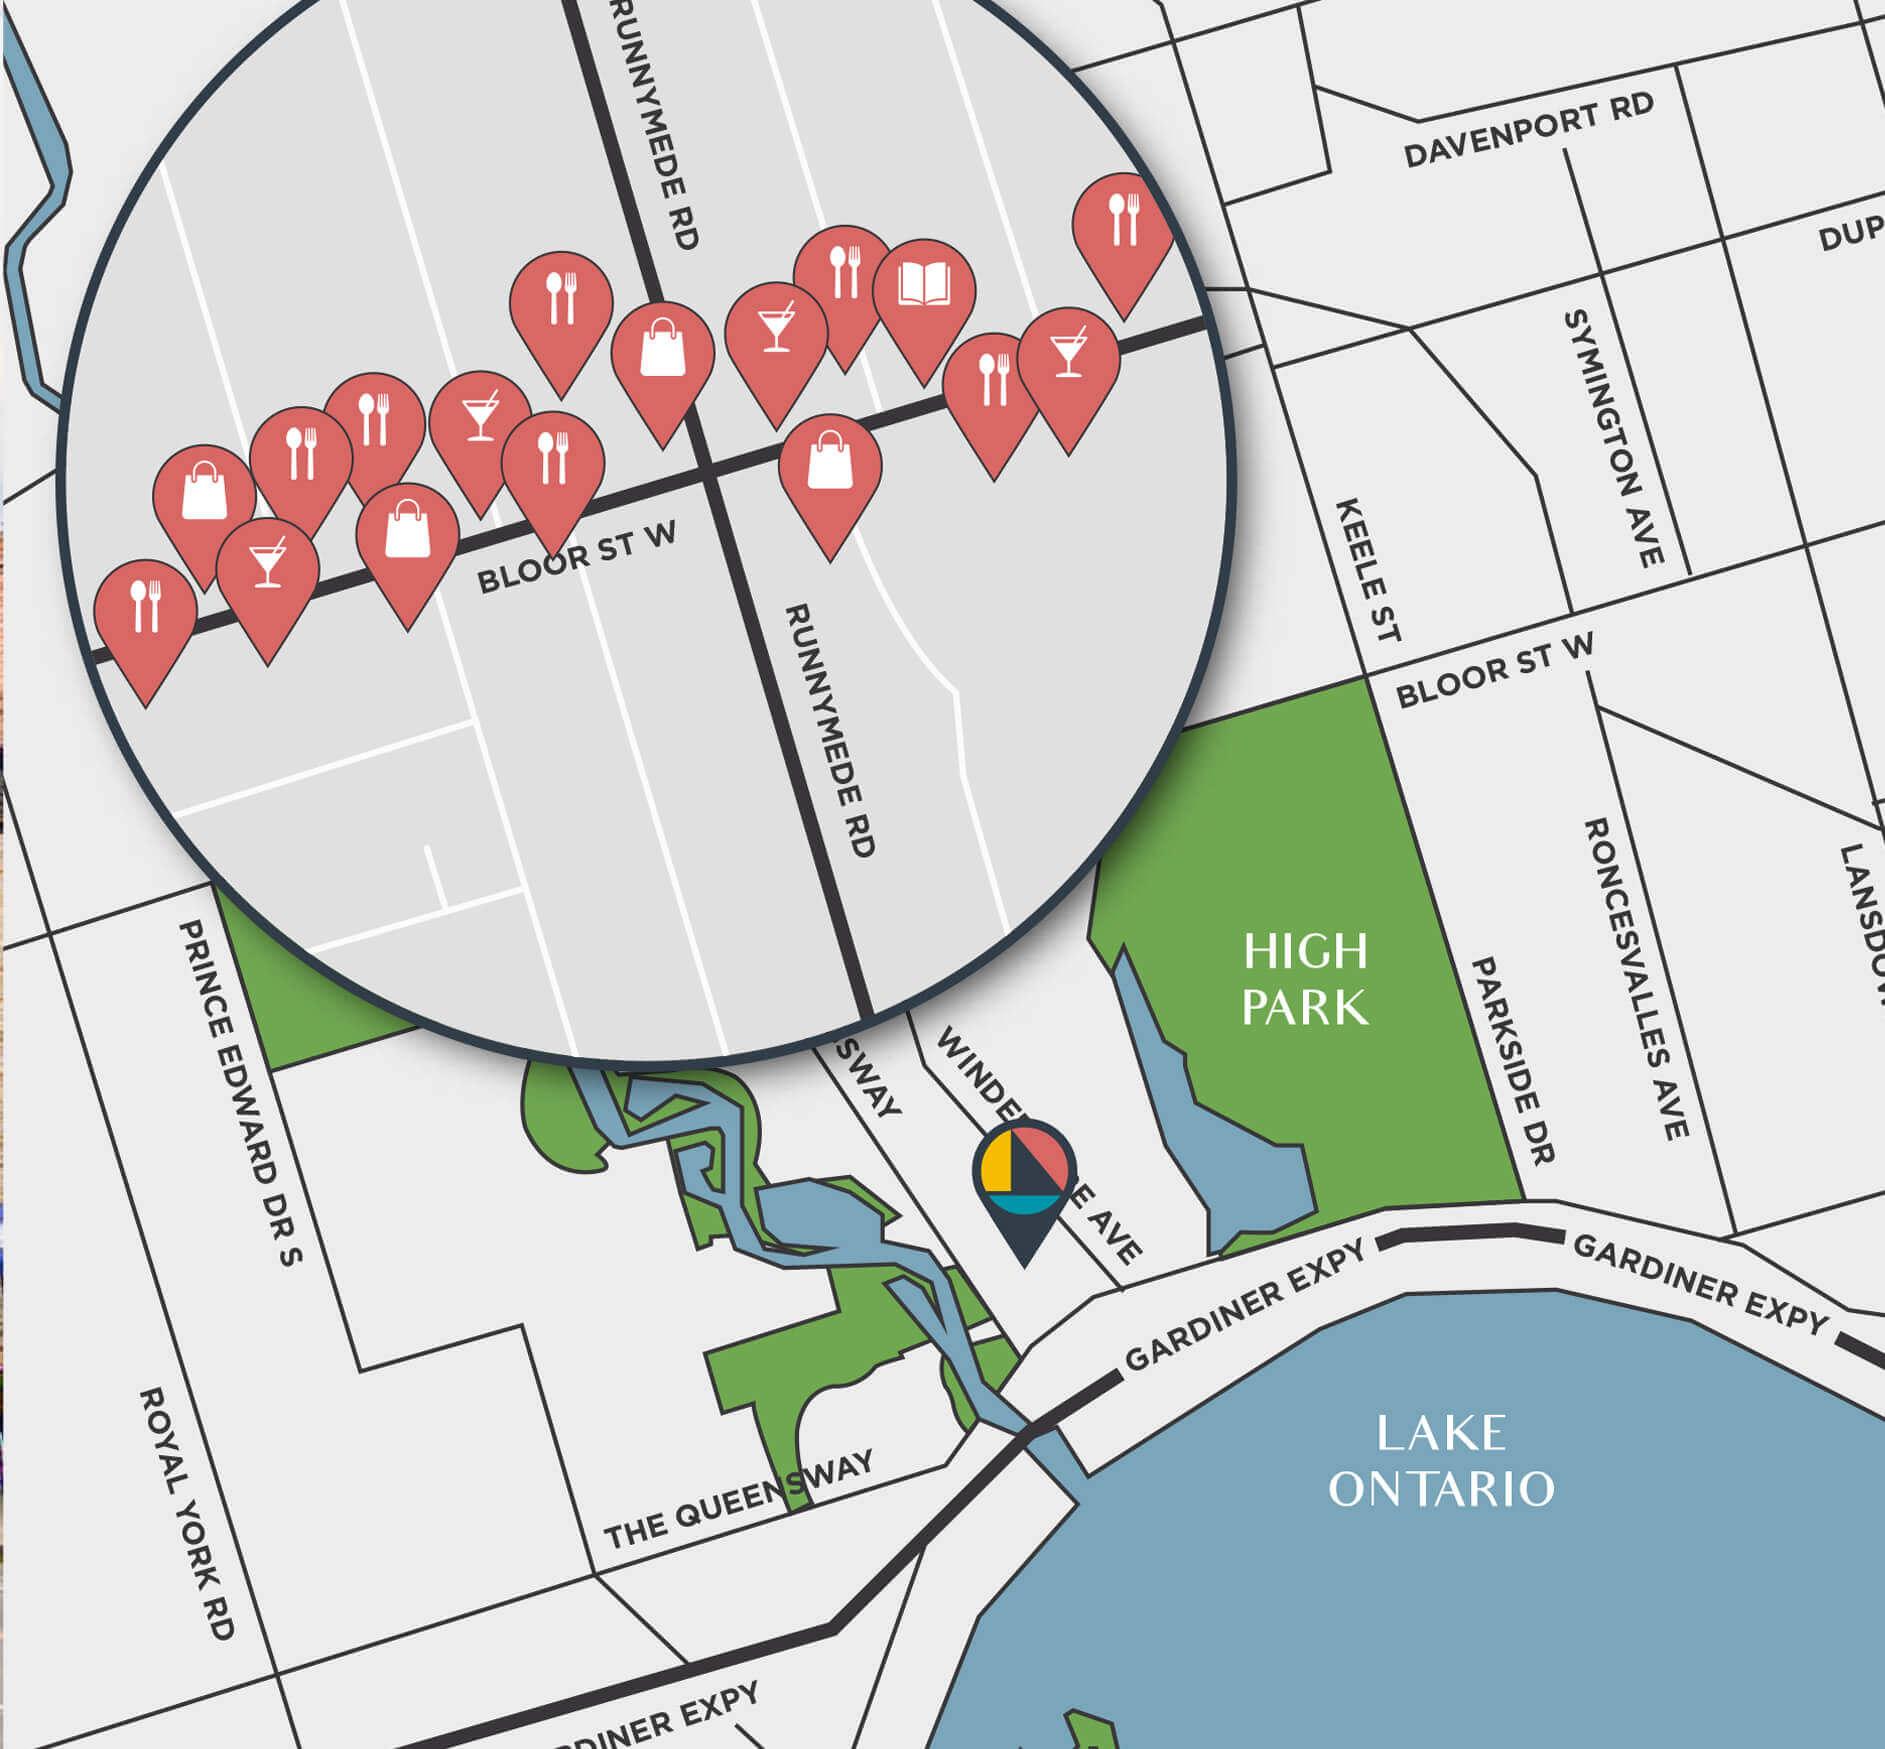 Map showing pin drops of retail shops along Bloor Street at Runnymede Road, Toronto.